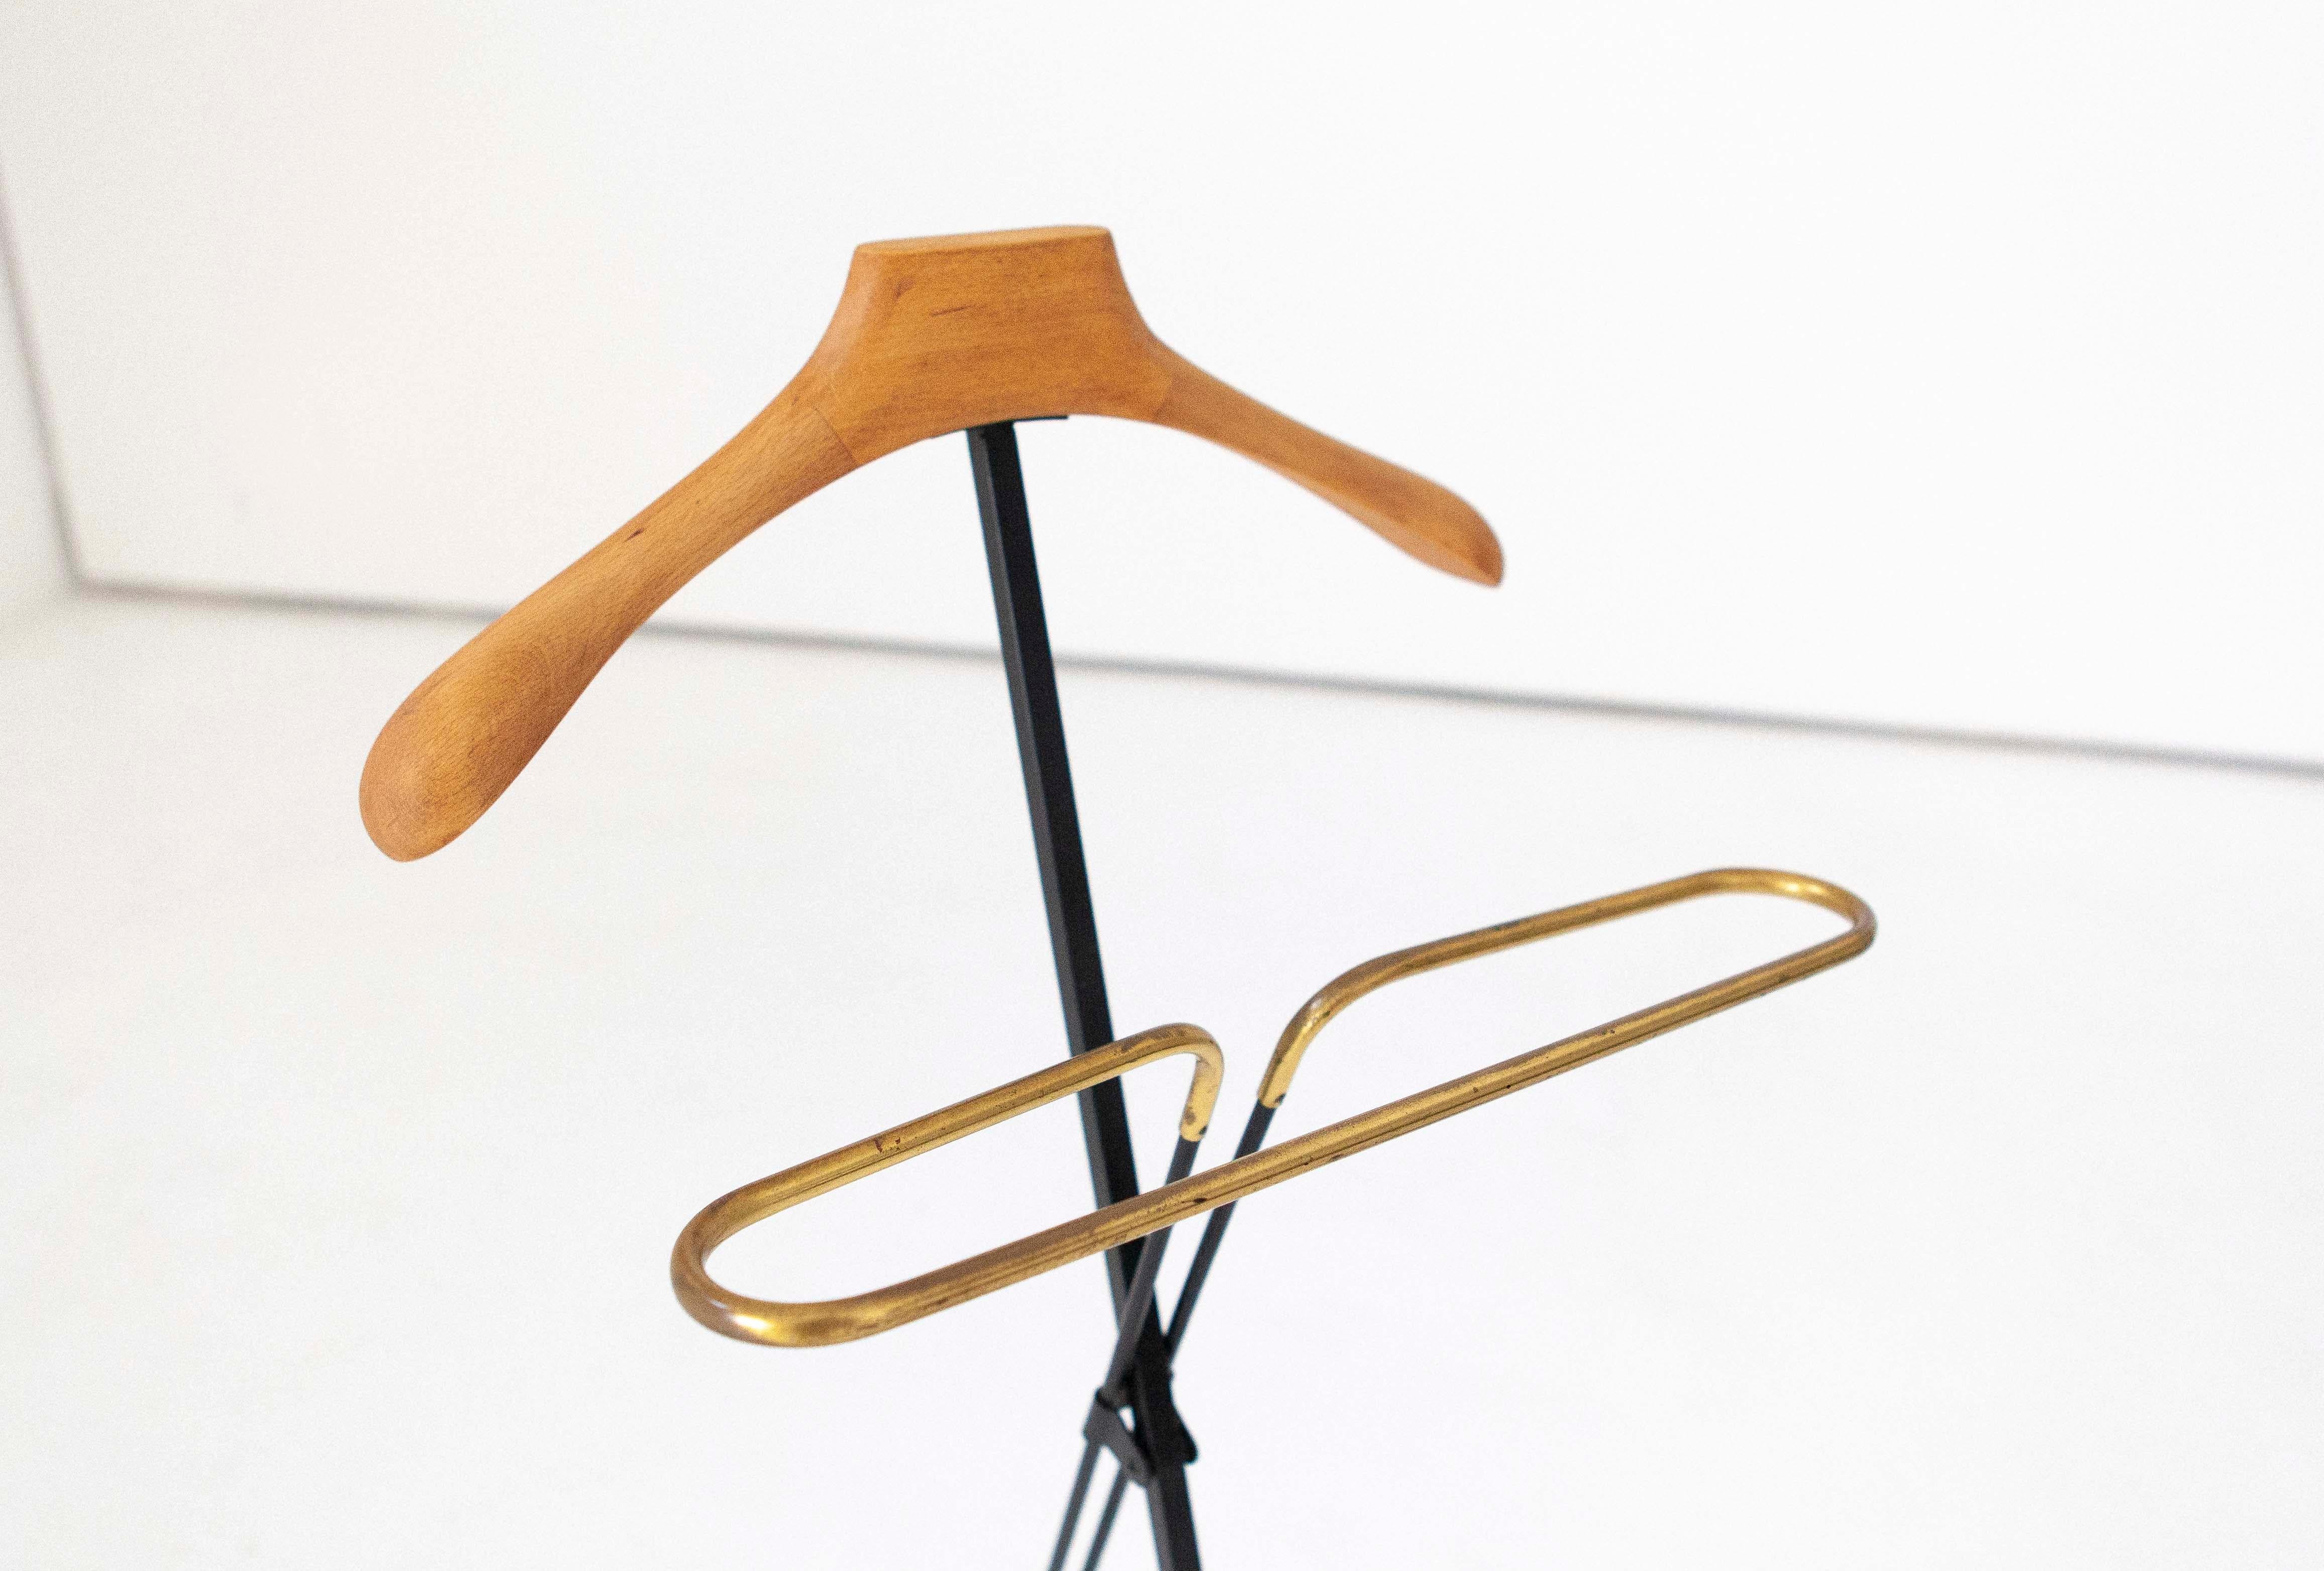 Italian Iron Brass and Wood Valet, 1950s For Sale 1